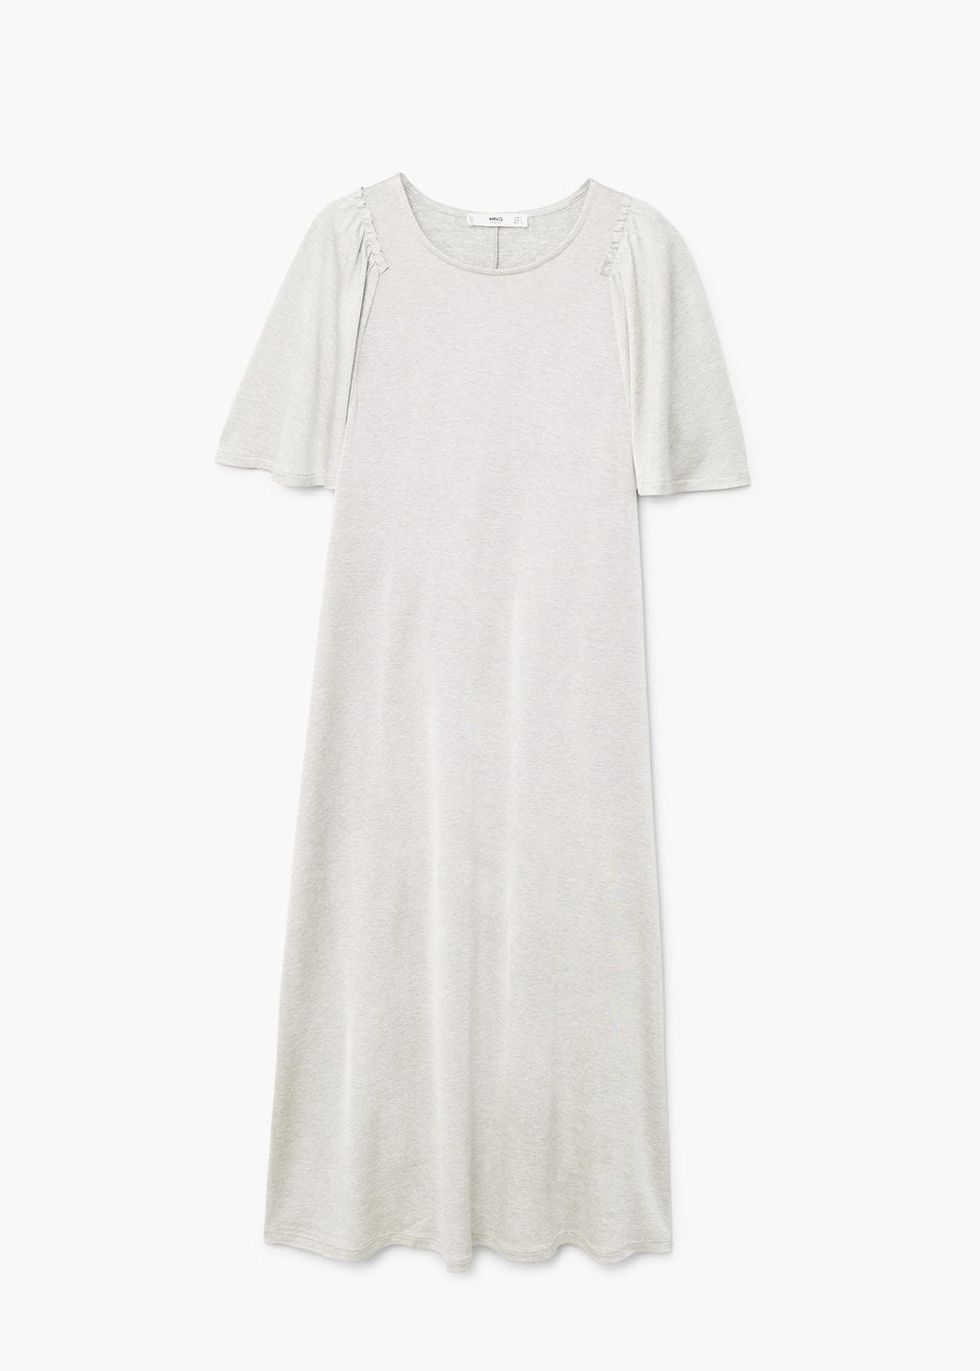 White, Clothing, Dress, Sleeve, Day dress, Product, T-shirt, Beige, Neck, Cocktail dress, 